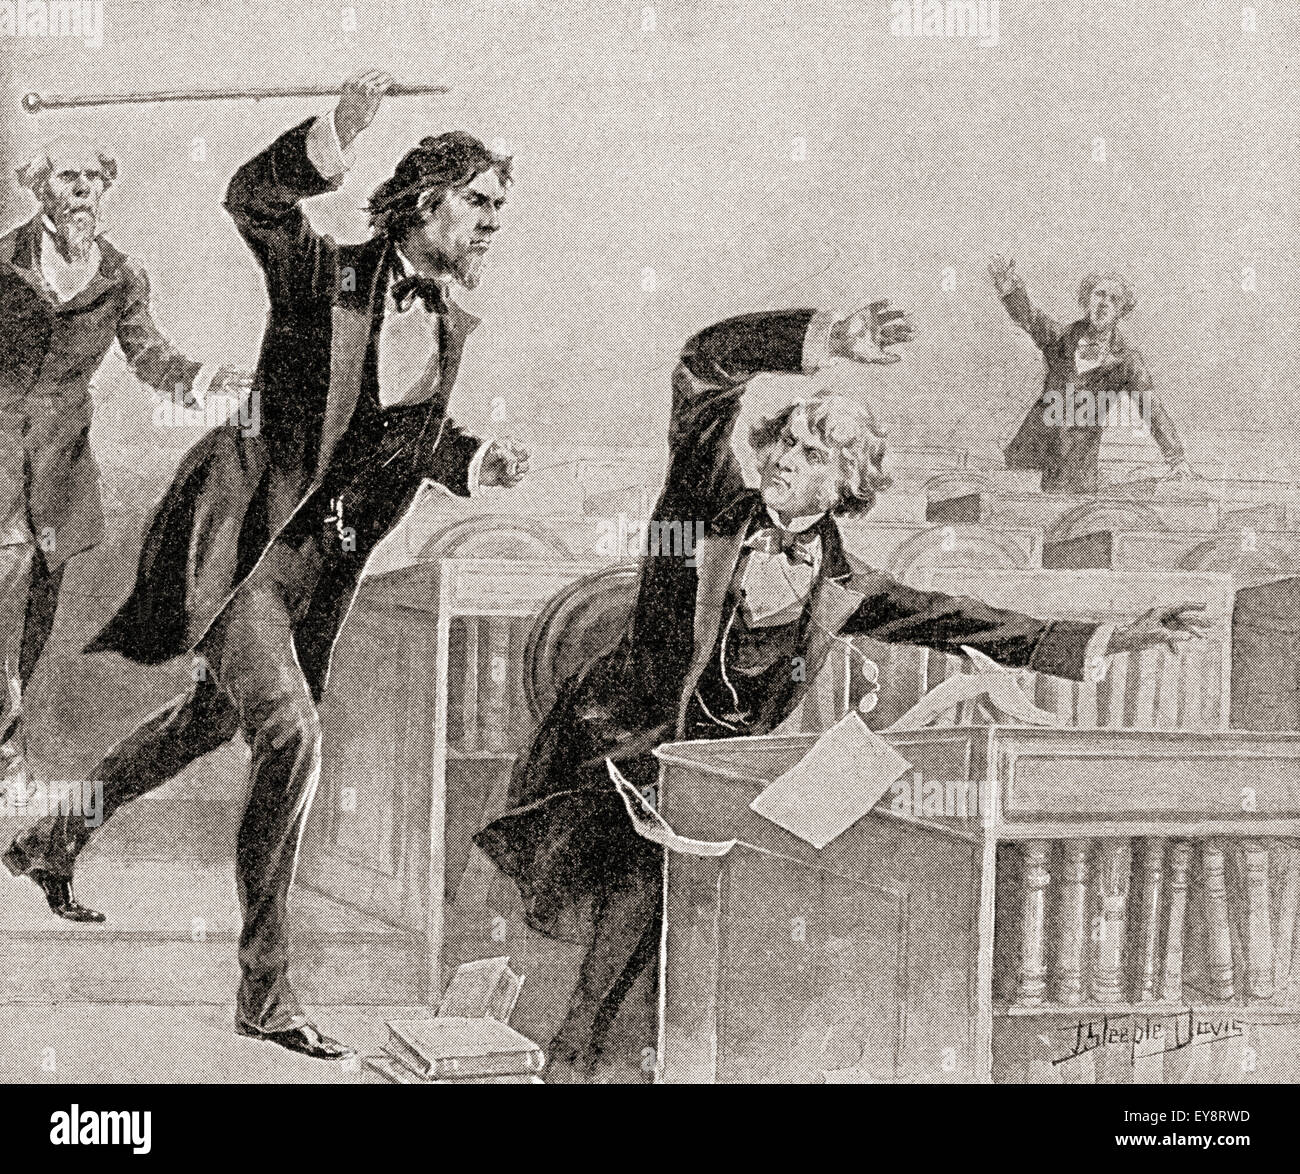 Preston Smith Brooks, a fervent advocate of slavery, assaulting  Senator Charles Sumner,  an abolitionist, with a cane on the floor of the United States Senate, on May 22, 1856, in retaliation for an anti-slavery speech by Sumner in which the former verbally attacked Brooks' second cousin, Senator Andrew Butler.  Preston Smith Brooks , 1819 – 1857. Democratic Representative.  Charles Sumner, 1811 – 1874.  American politician and senator from Massachusetts. Stock Photo